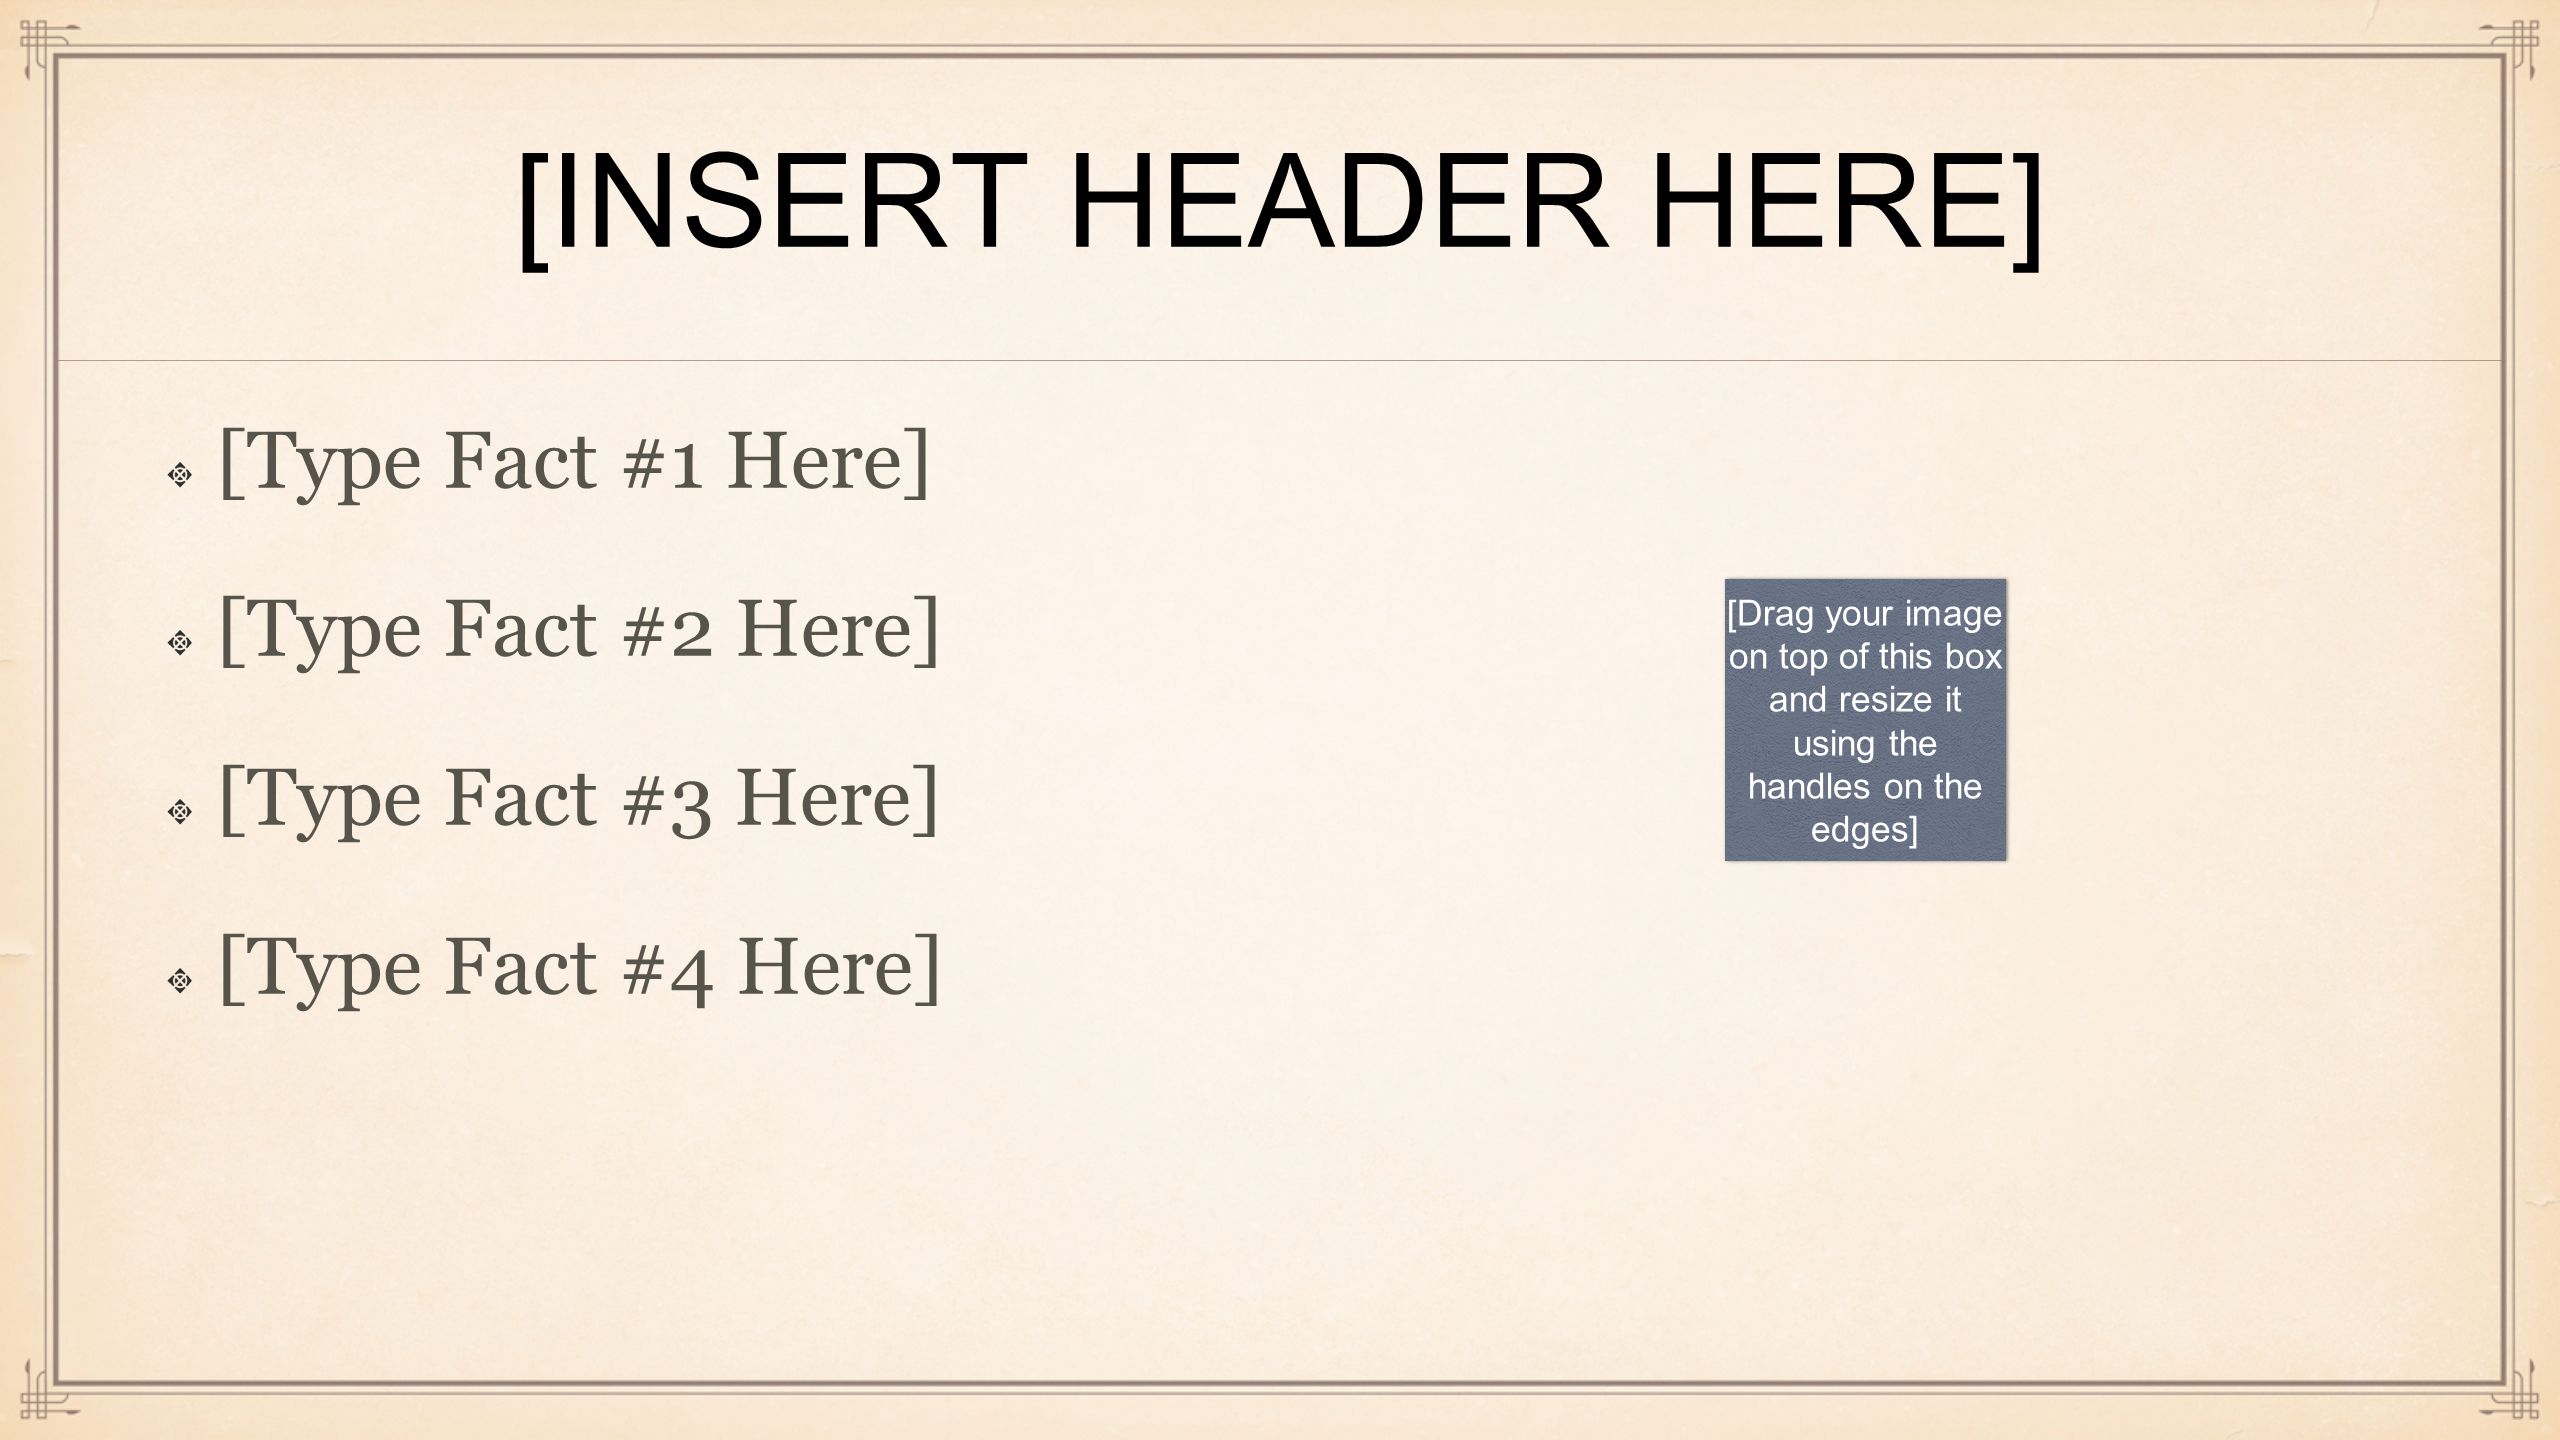 [INSERT HEADER HERE] [Type Fact #1 Here] [Type Fact #2 Here] [Type Fact #3 Here] [Type Fact #4 Here] [Drag your image on top of this box and resize it using the handles on the edges]